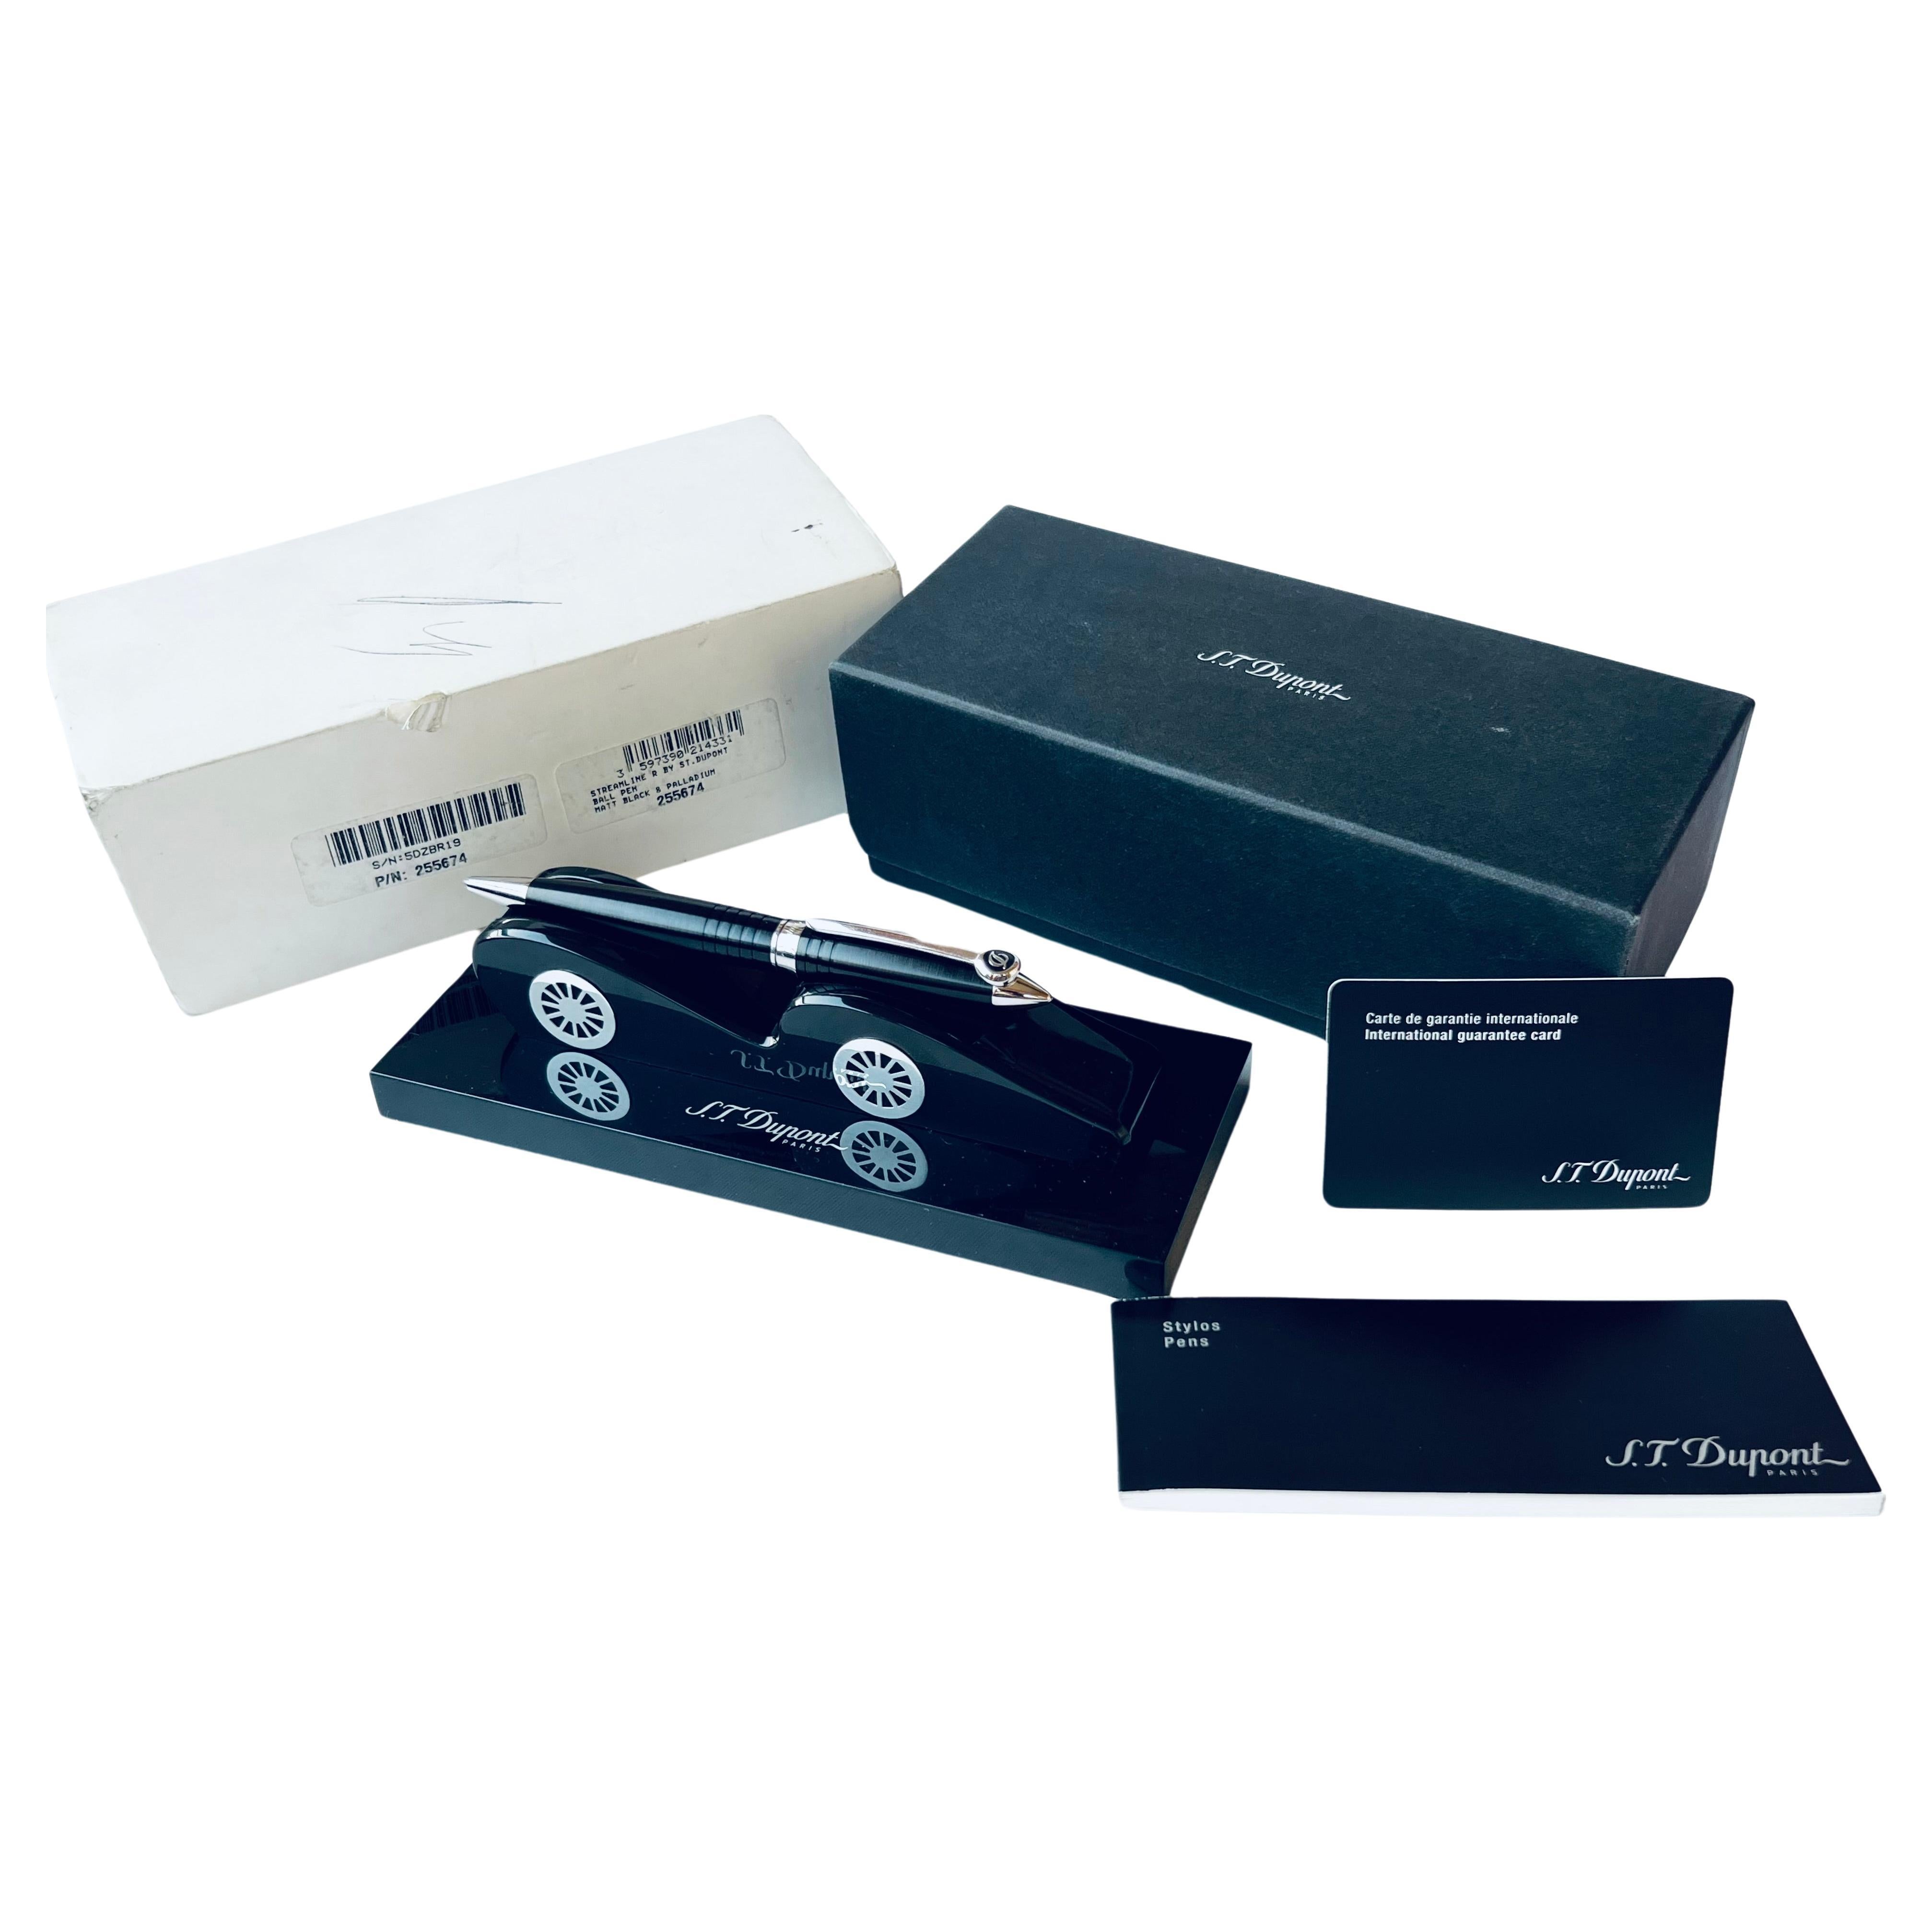 Prestige S.T. Dupont Collectors cufflinks Ballpoint And Wallet Cards Holder Kit

Absolute new goods

Filler and ballpoint pen (Blue Ink) , length closed: 142 mm, length open 145 mm

Cufflinks palladium with the monochrome effect of onyx and